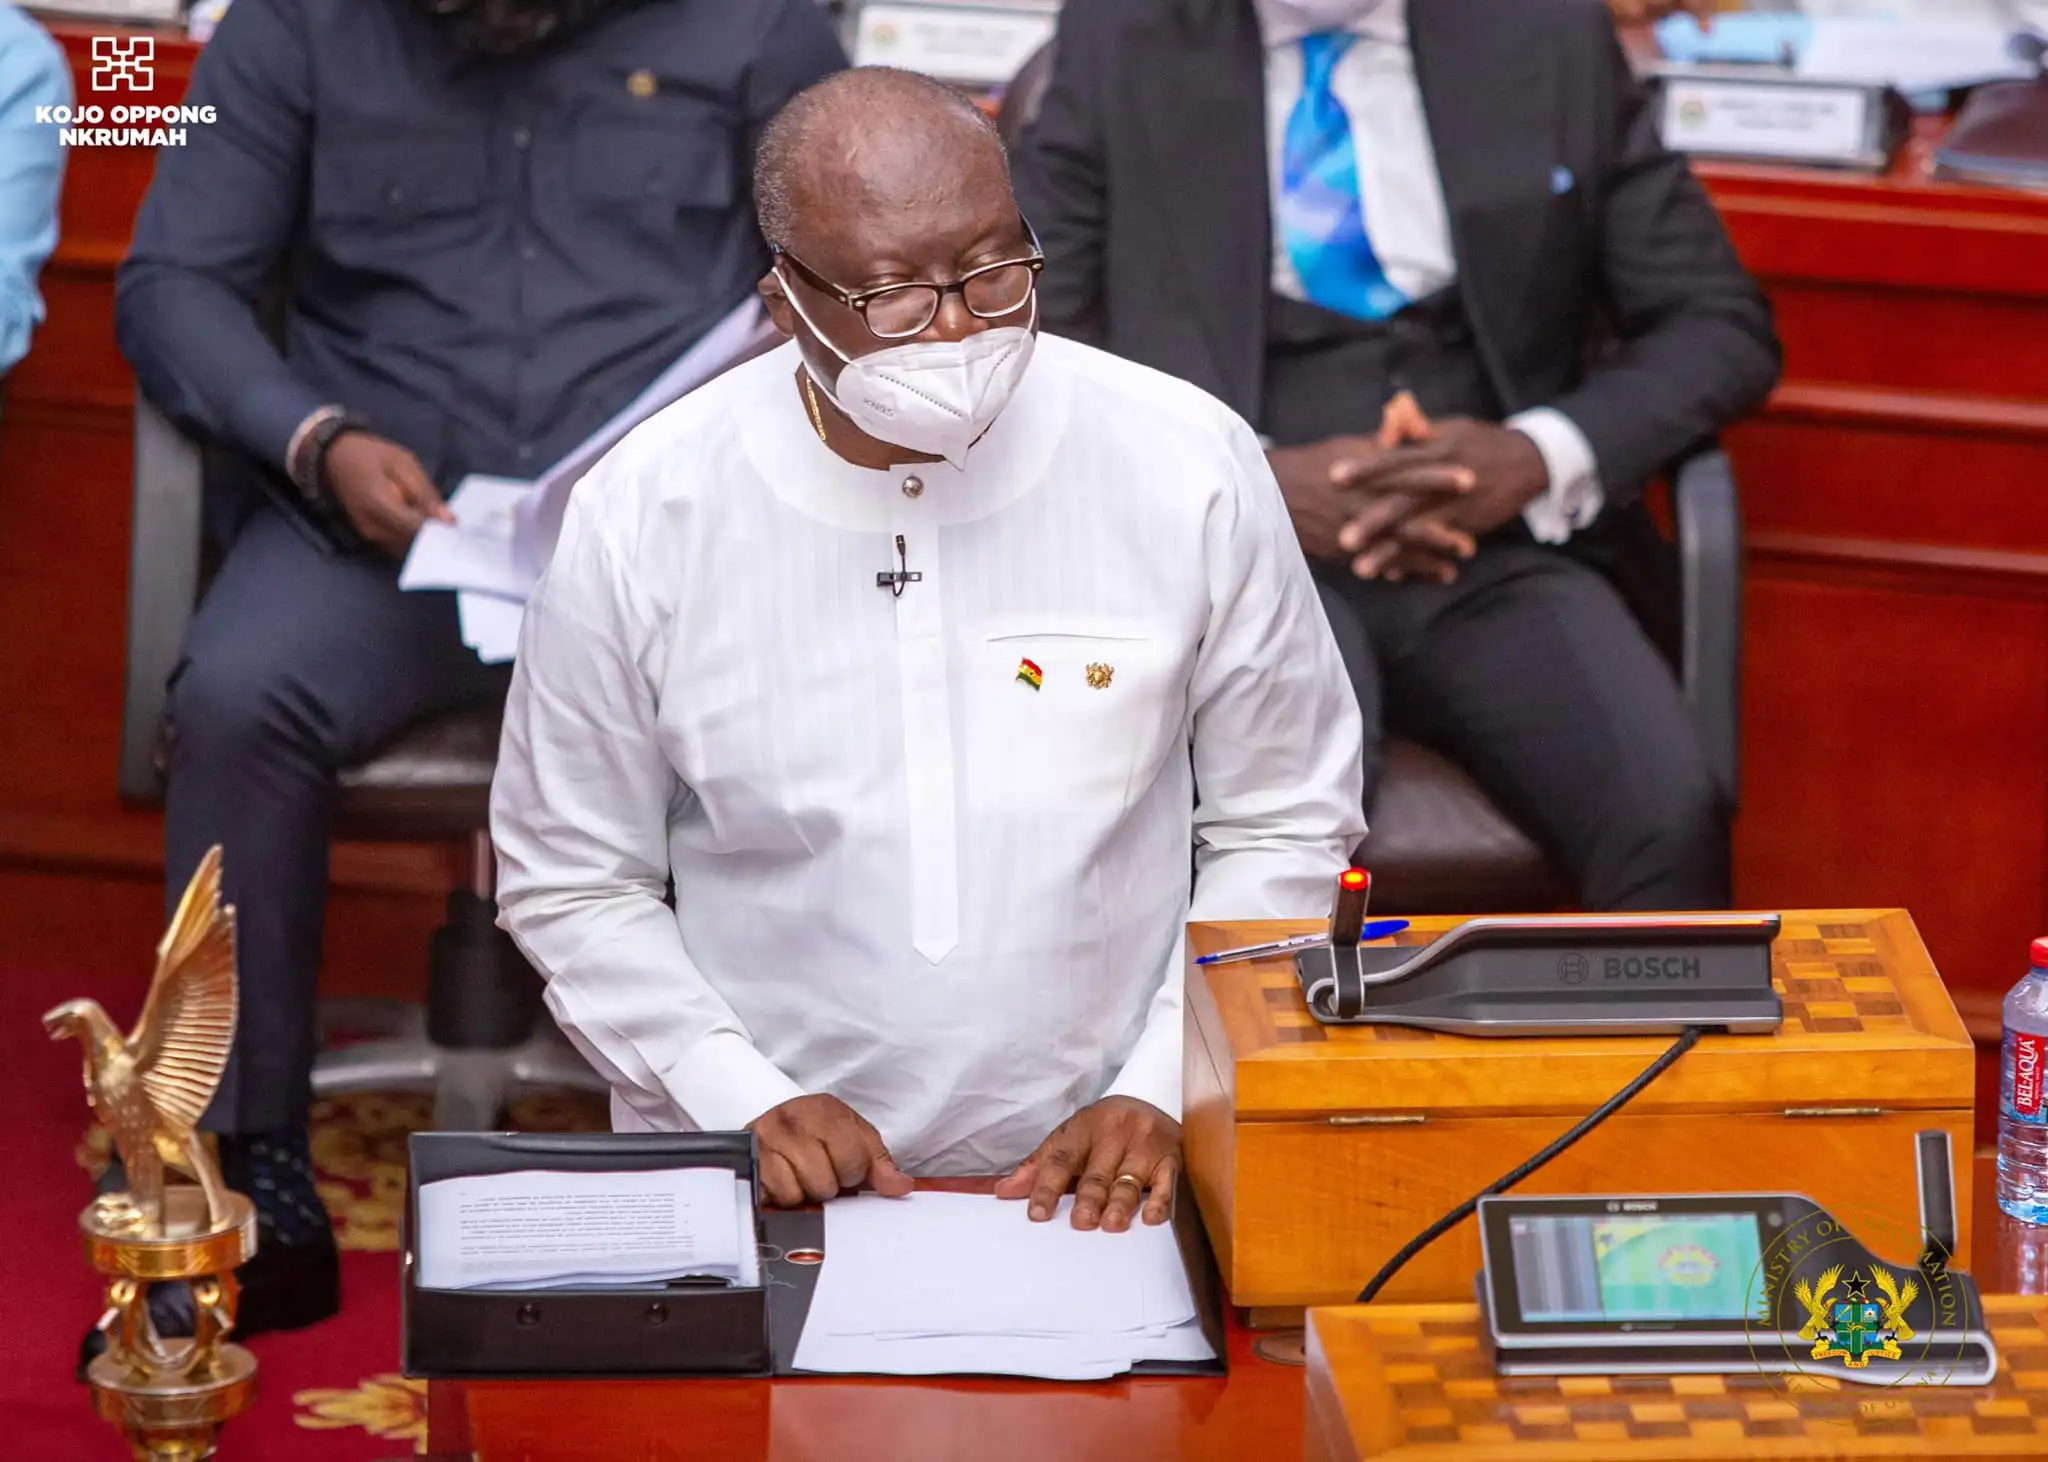 Ghana’s GDP projections revised from 2.8% to 1.5% — Ofori-Atta